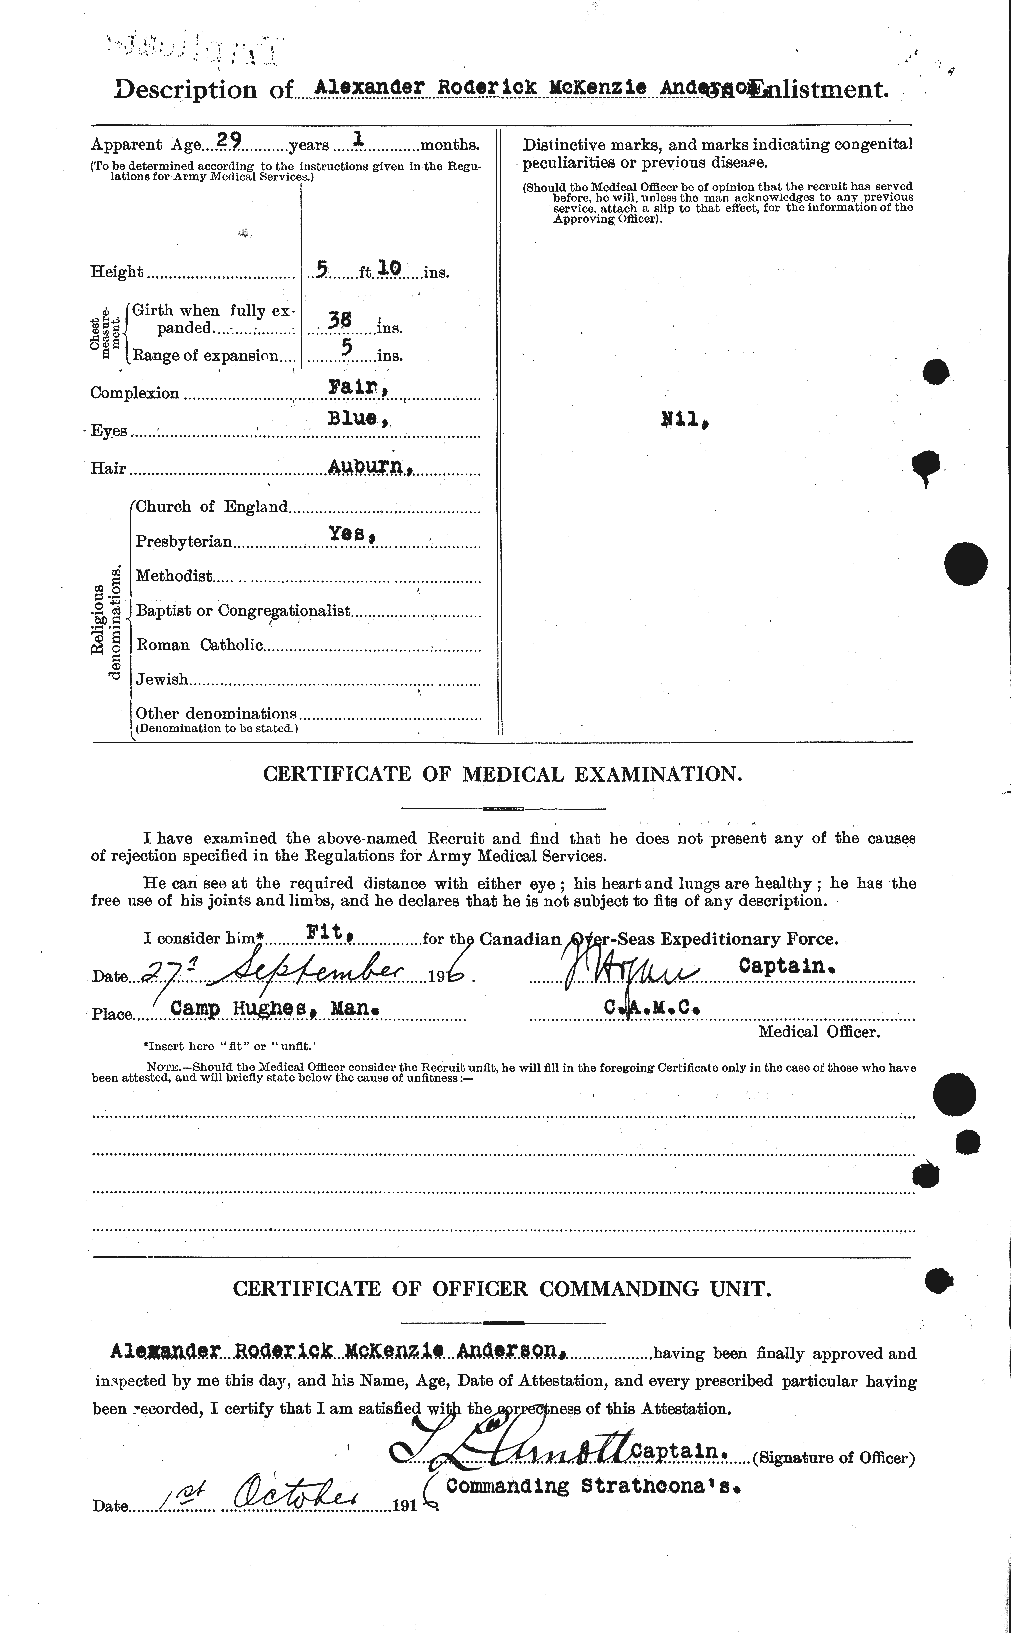 Personnel Records of the First World War - CEF 209476b